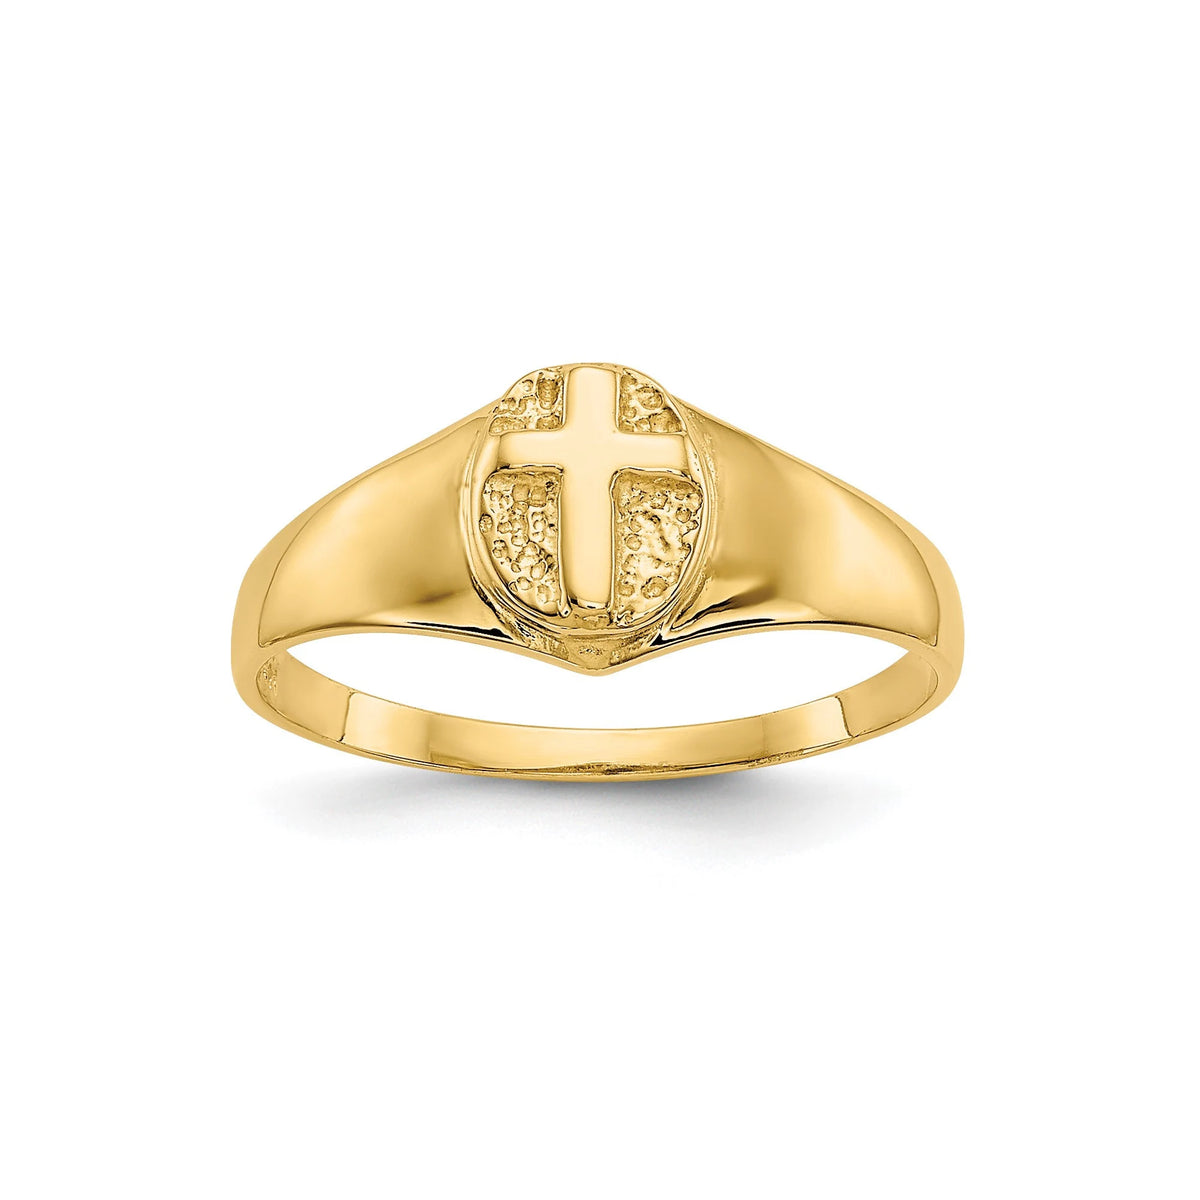 14k Yellow Gold Raised Cross Ring Baby Child  Size 1 - 5 Baby/Toddler Size Children's Ring Band with Cross - Gift Box Included - Made in USA